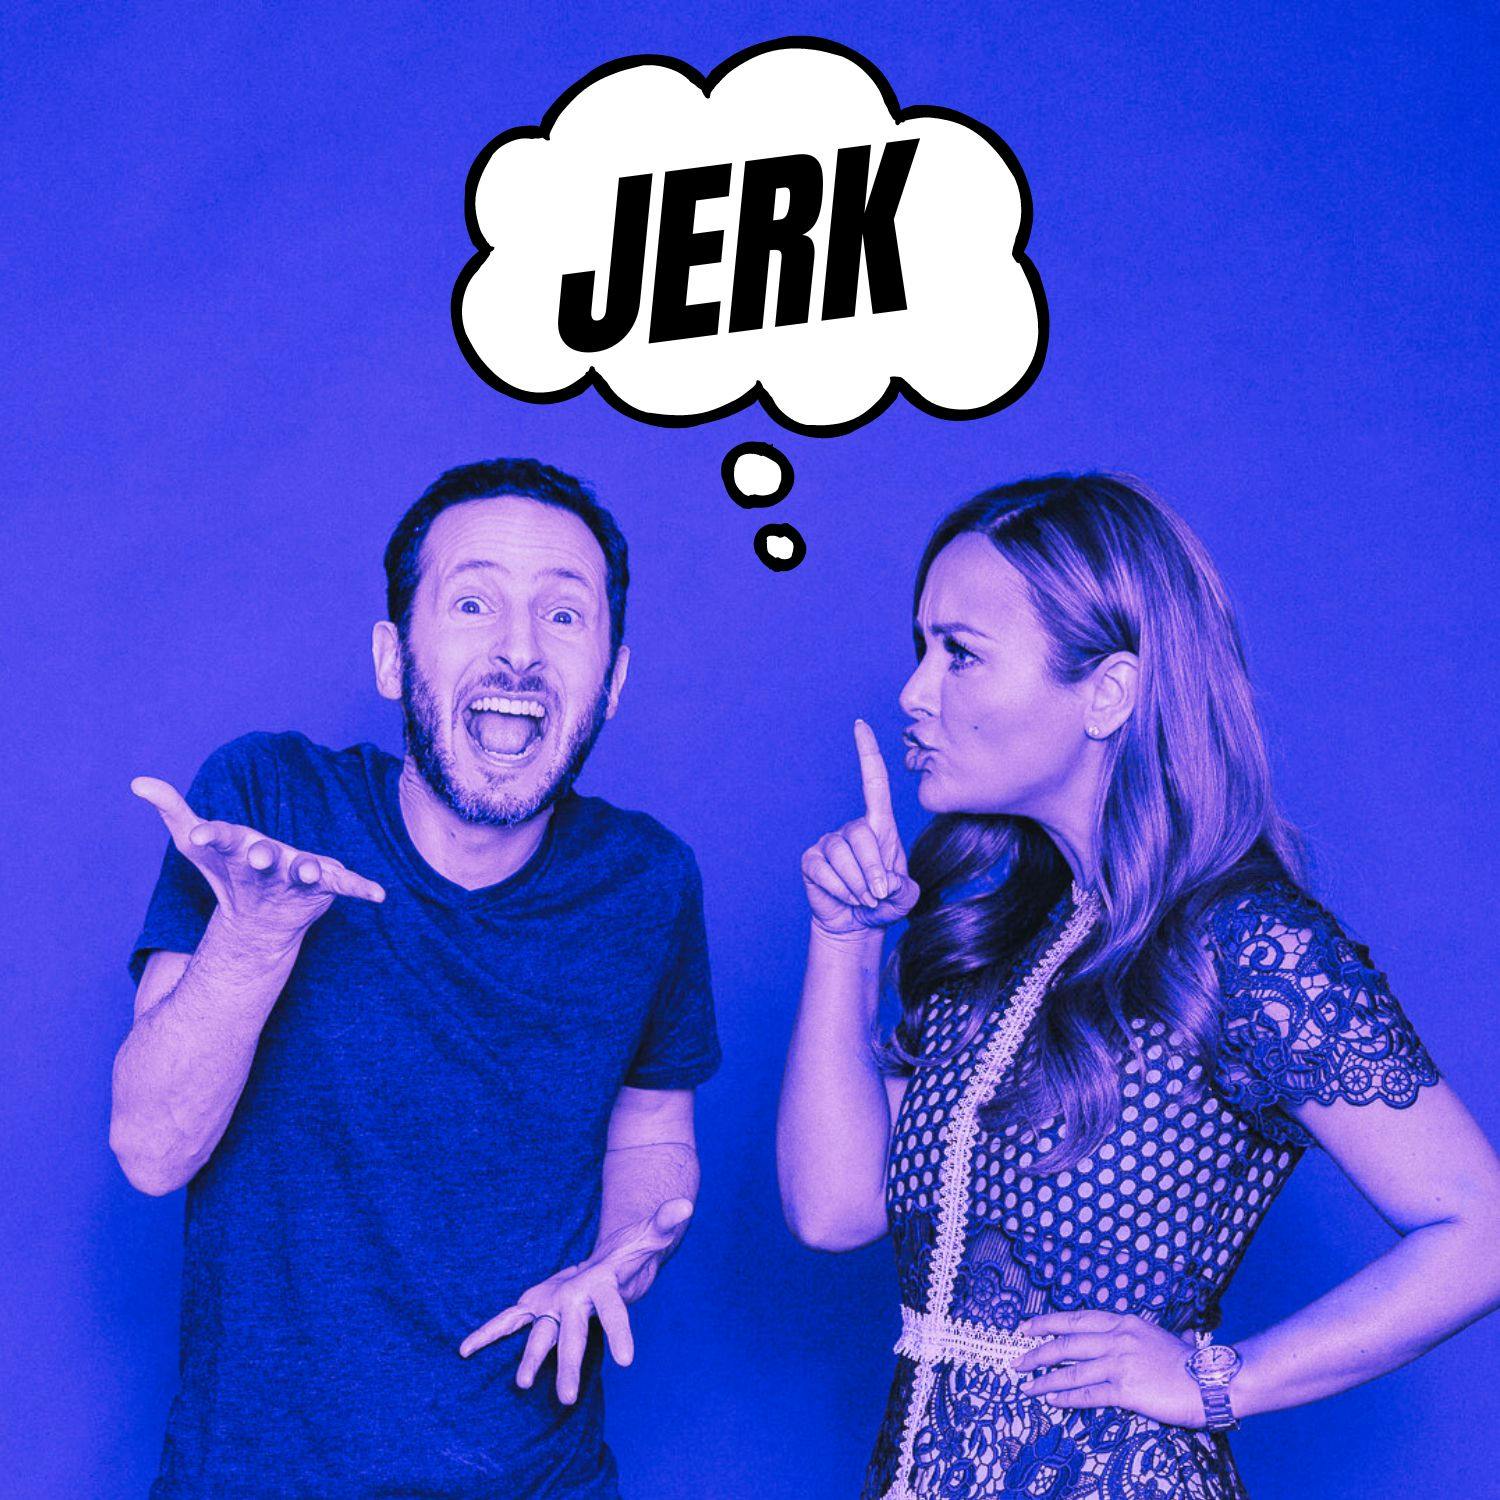 Your Colleague Is Being a Jerk... Should You Tell Them?